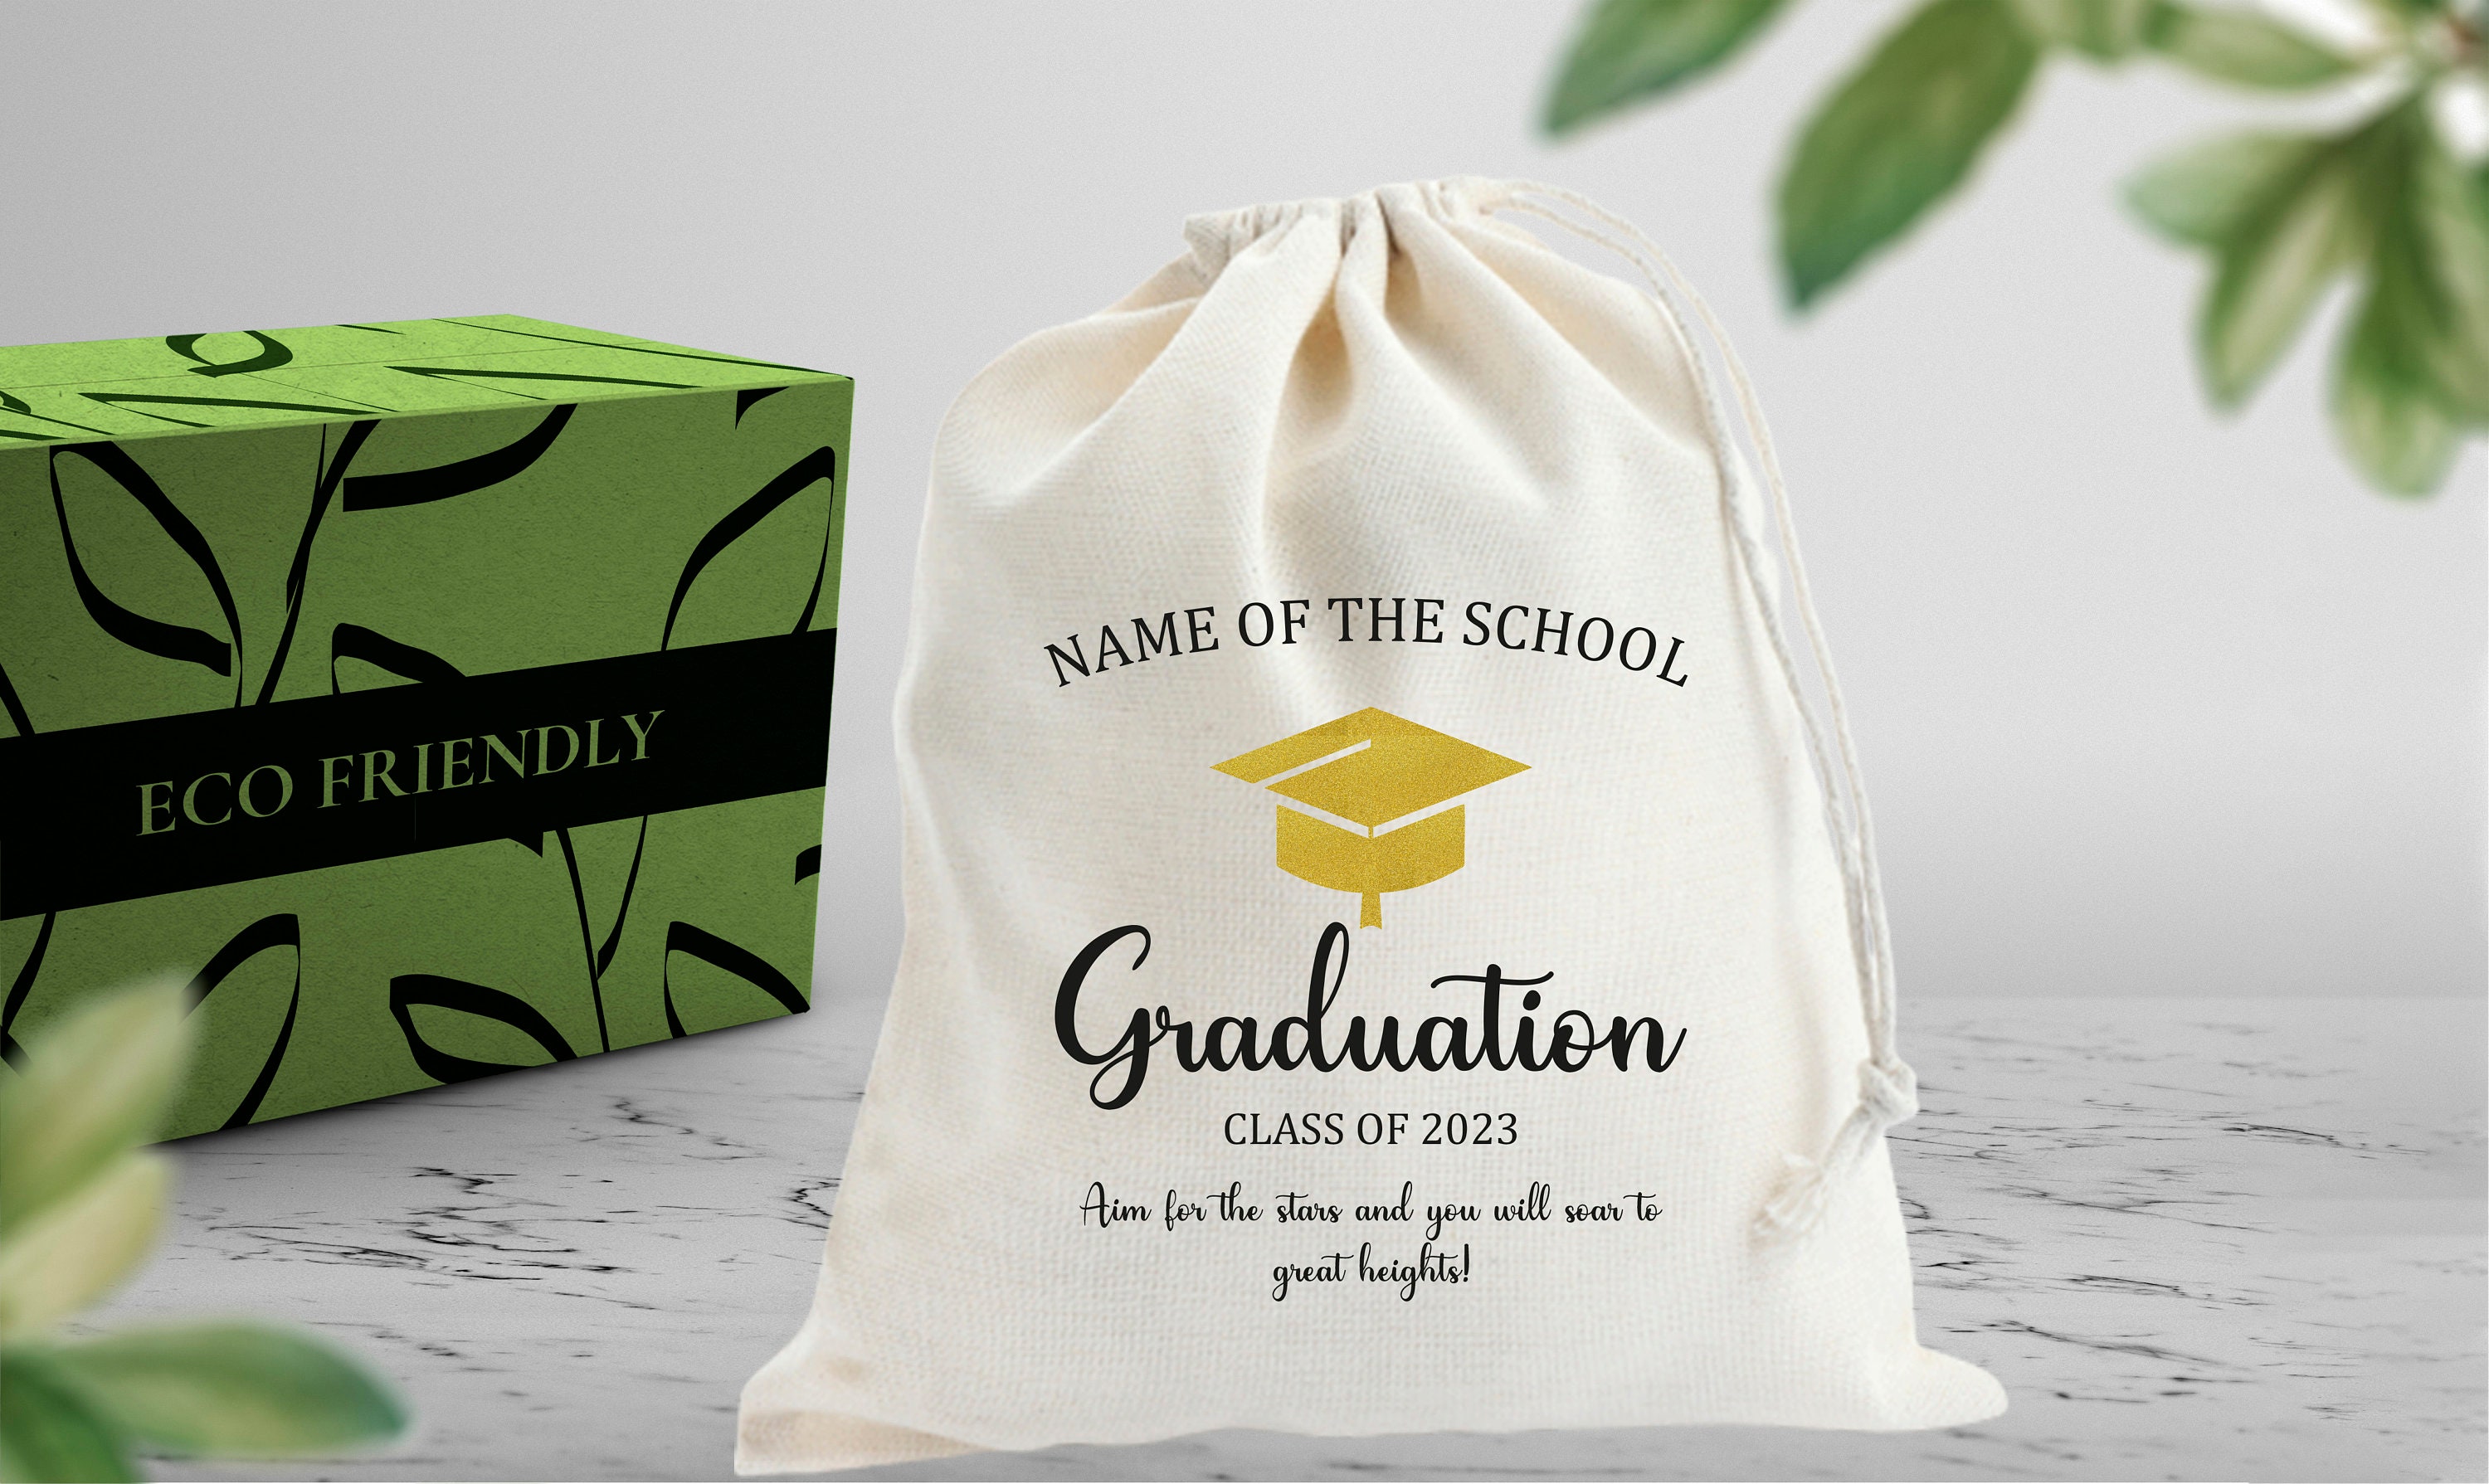 Graduation Party Goody bags for adults  Graduation party planning  Graduation party favors Law school graduation party